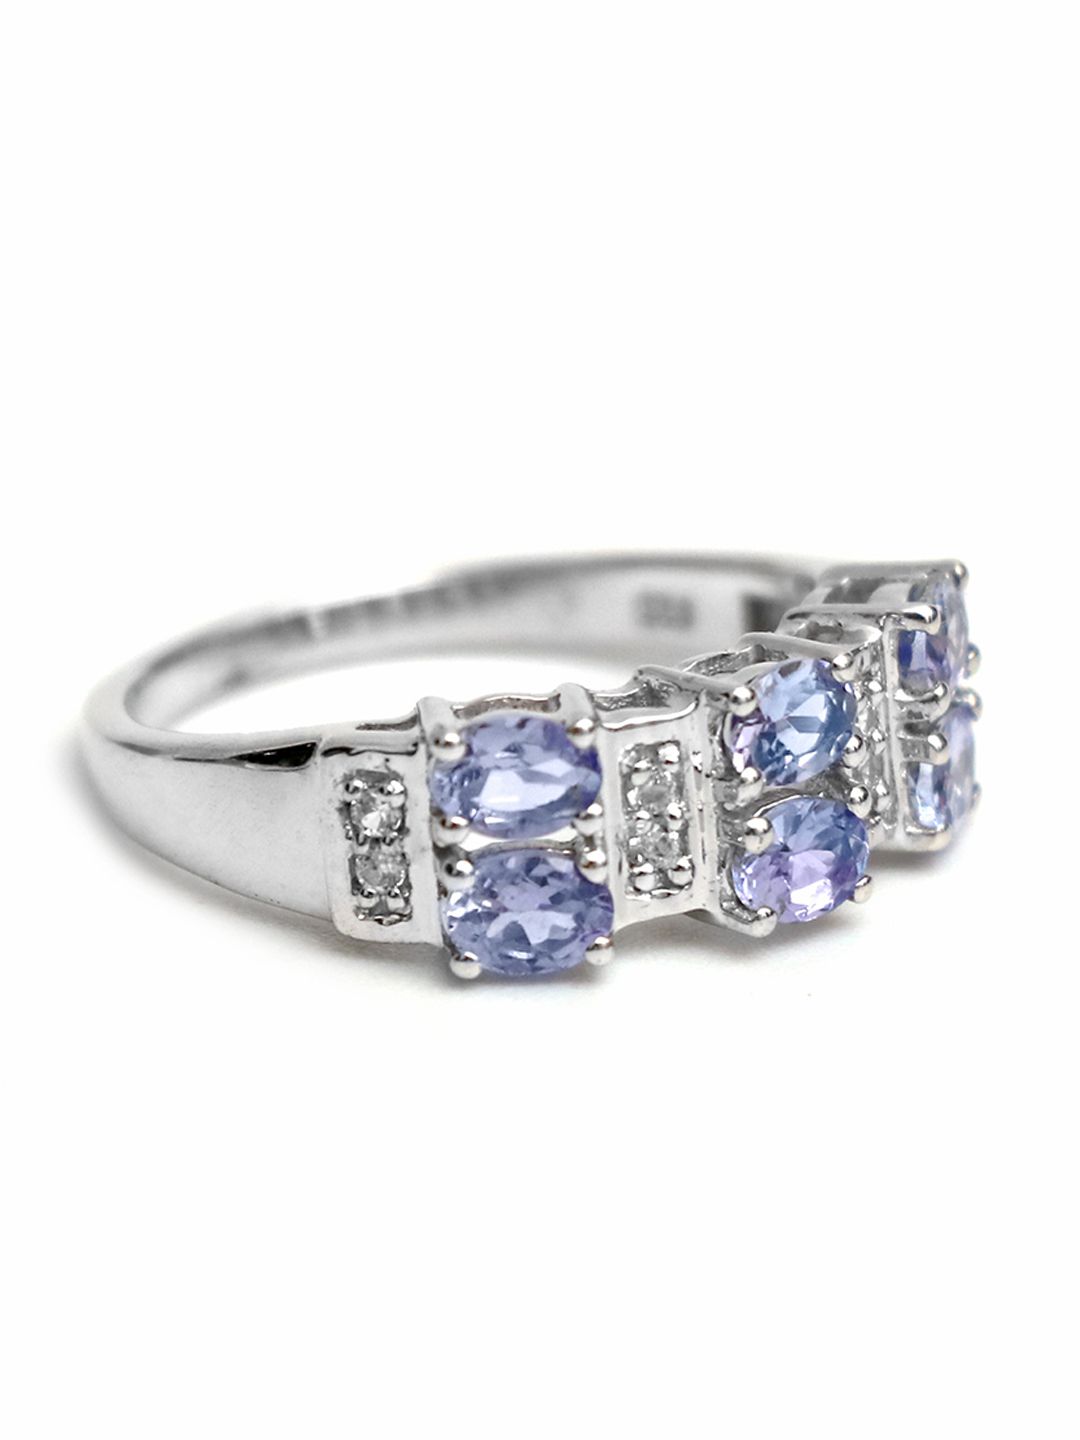 HIFLYER JEWELS Rhodium-Plated Silver-Toned & Blue Gemstone-Studded Finger Ring Price in India